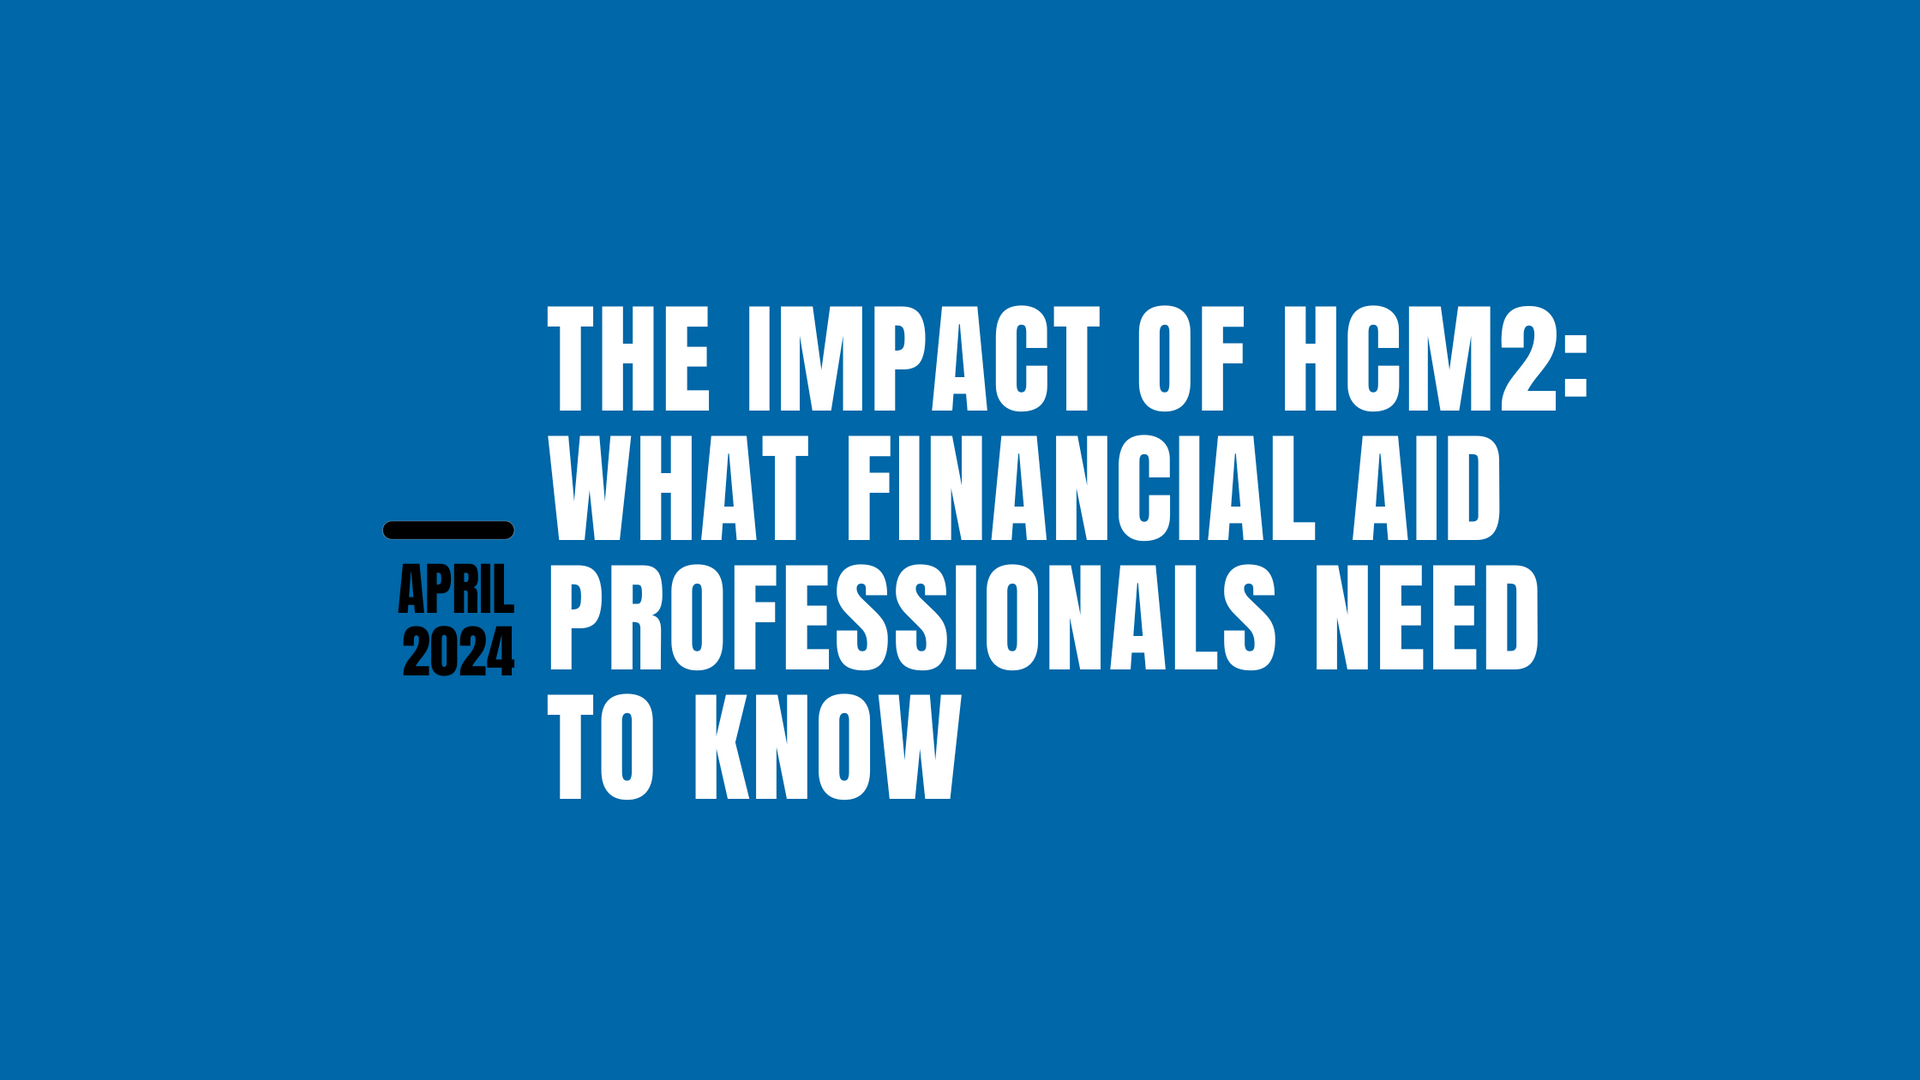 What Financial Aid Professionals Need to Know About HCM2